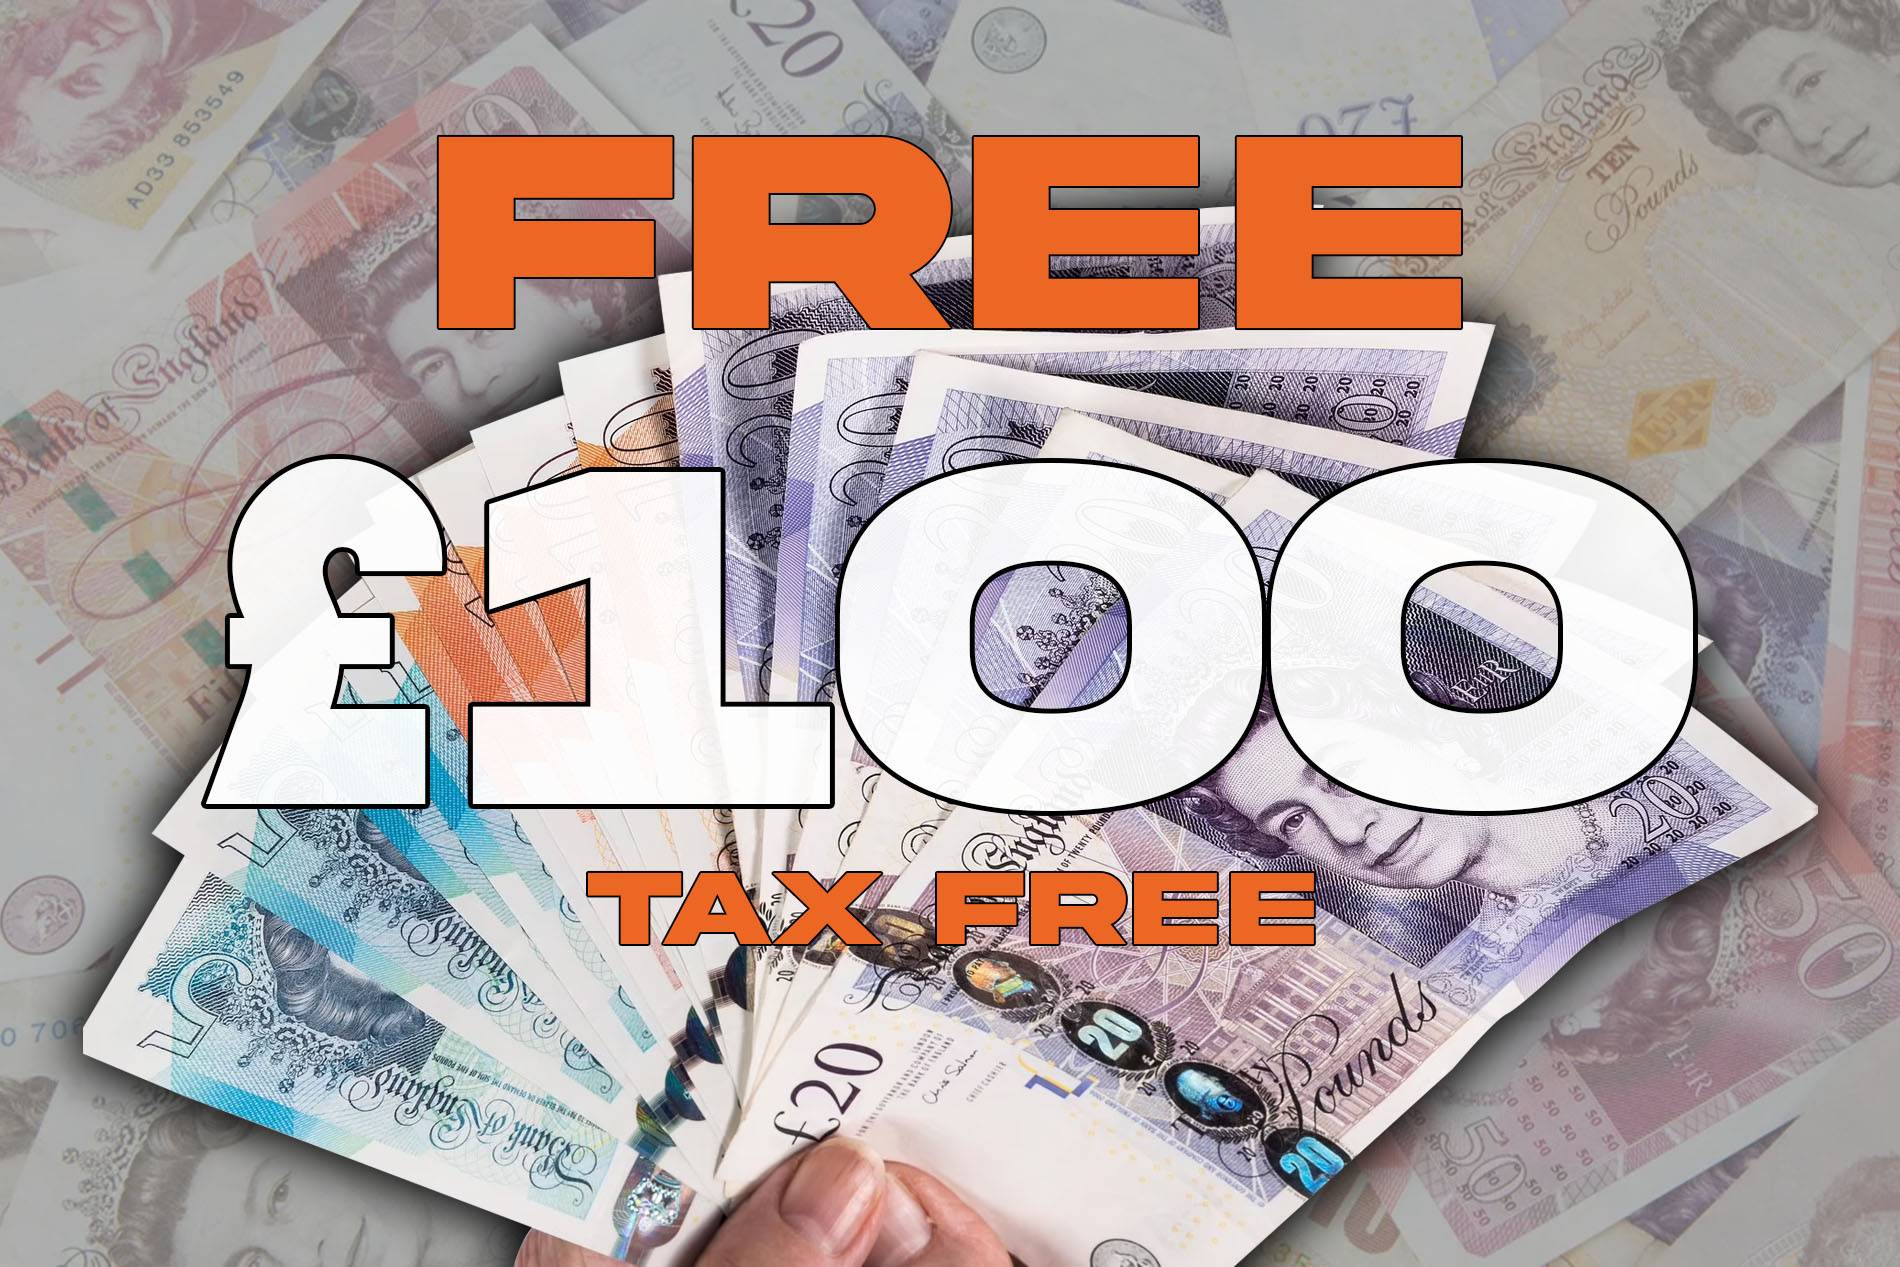 FREE: Chance To Win £100 Tax Free Cash (Spend £1 and Triple to £300)